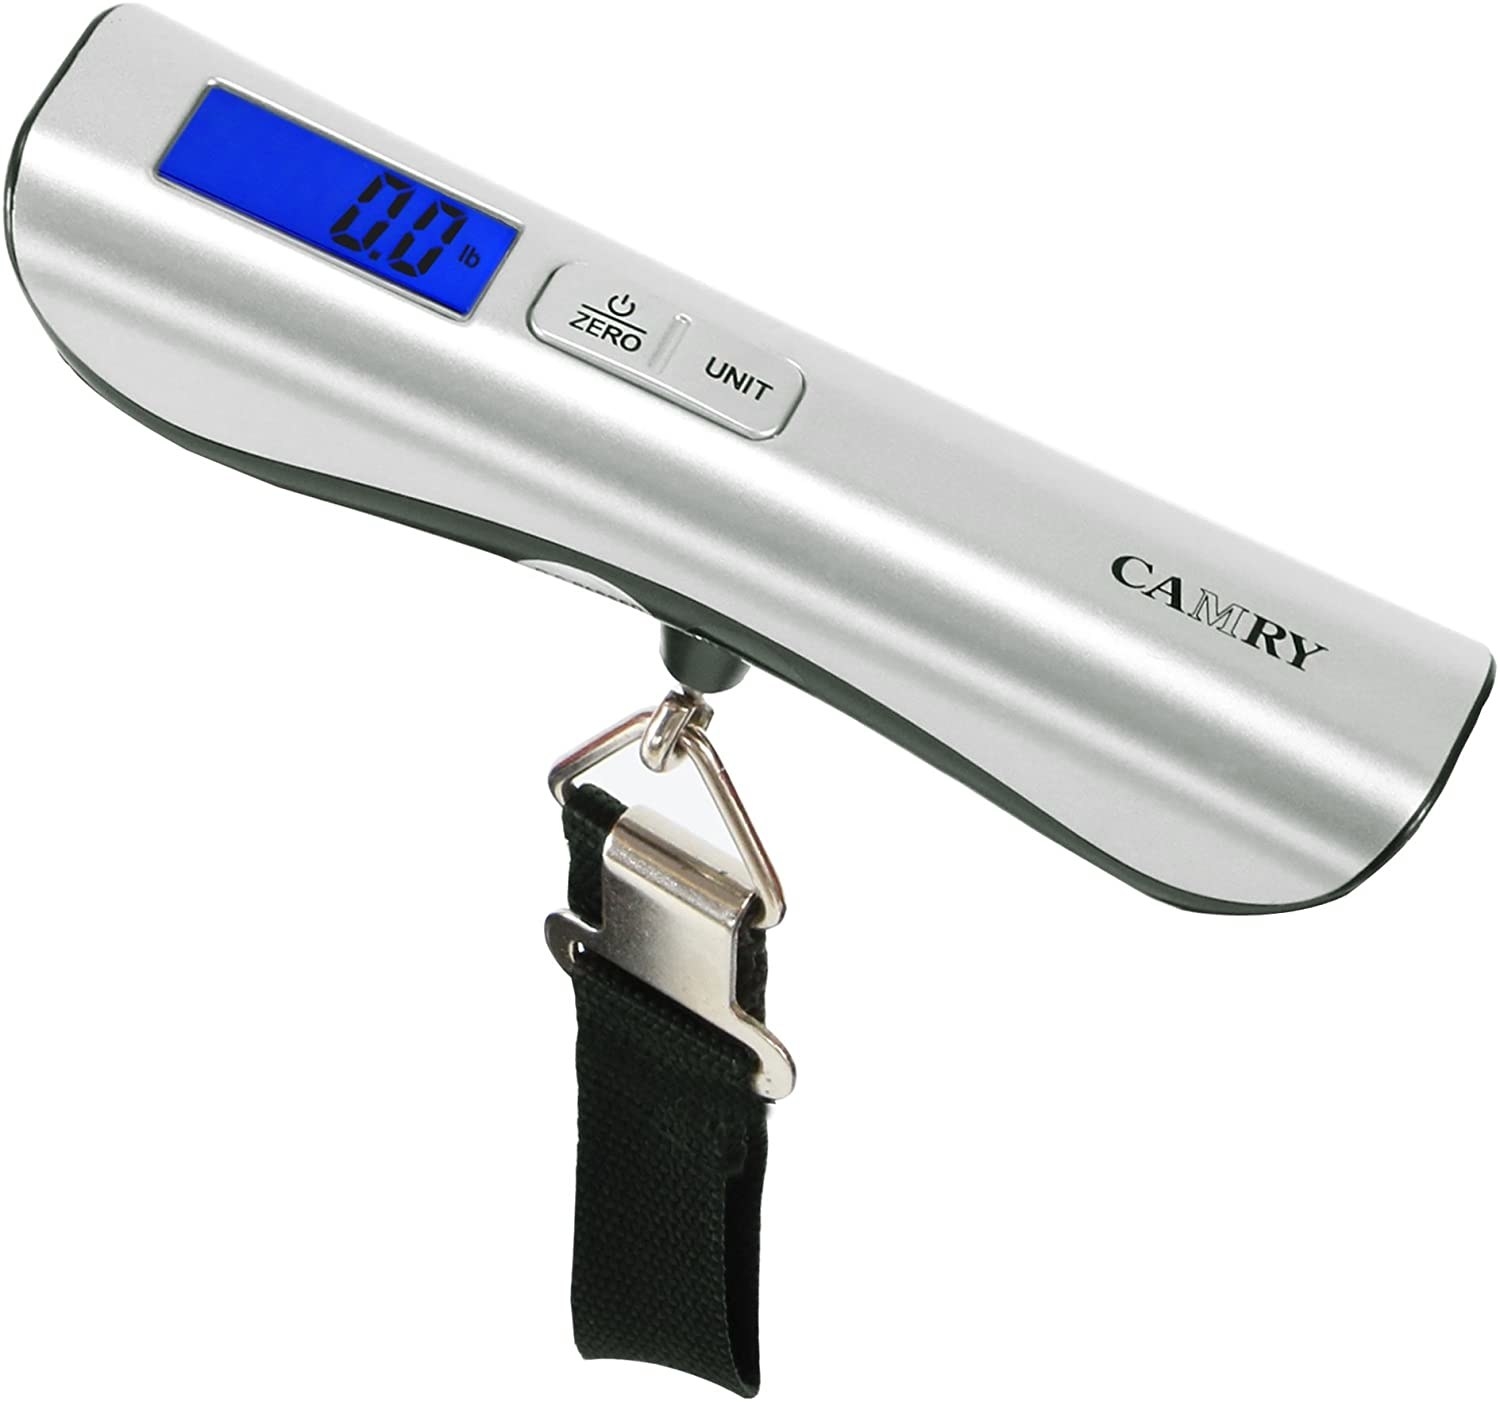 Silver digital scale with black strap and metal clip